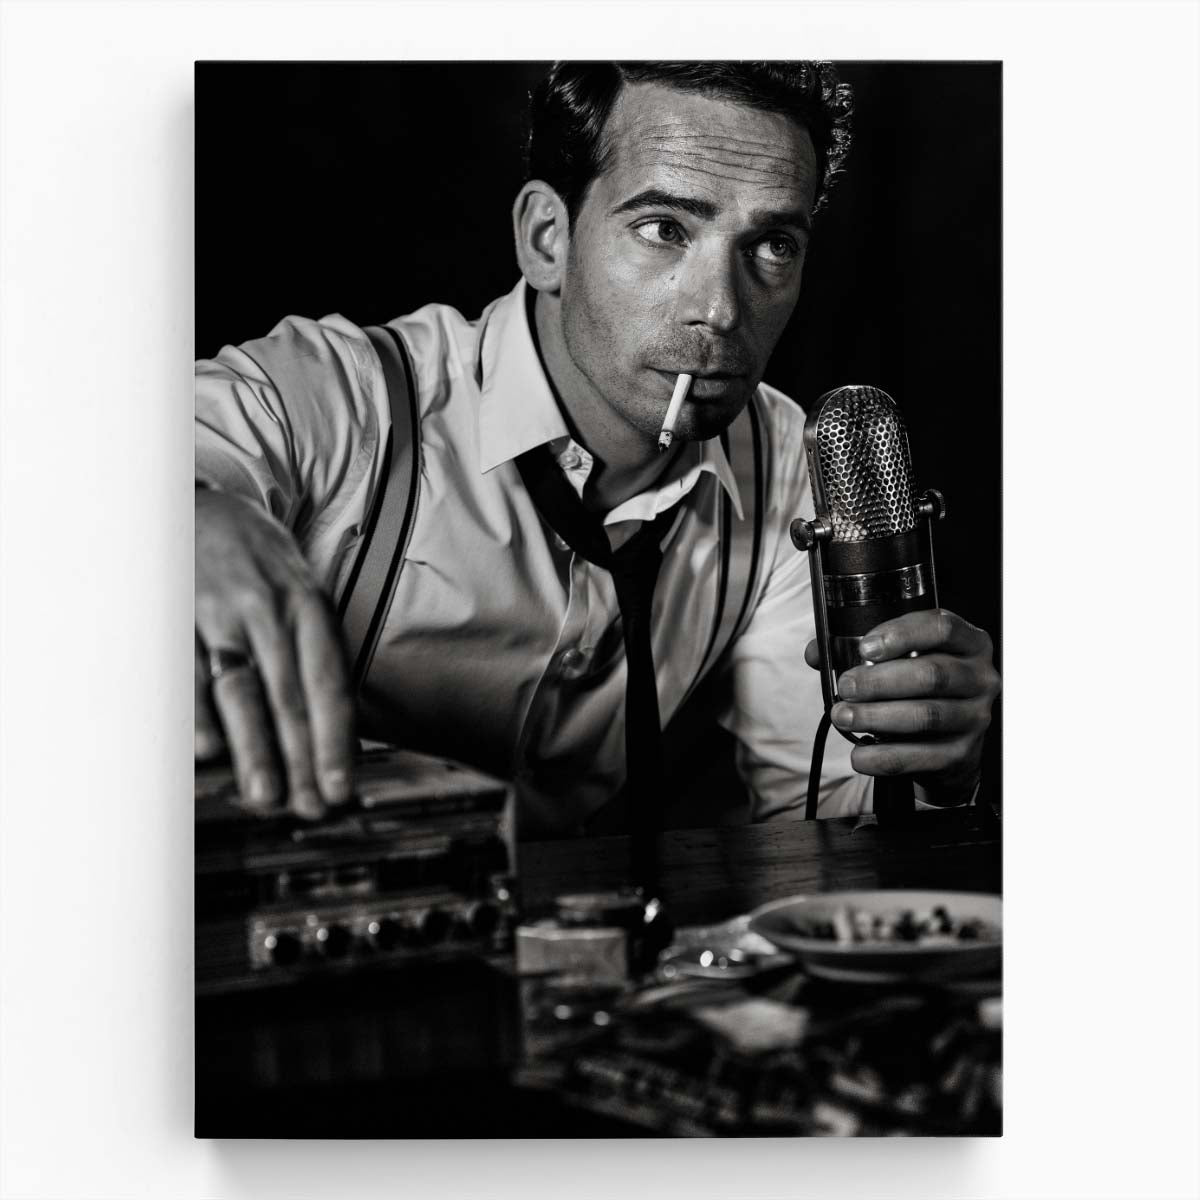 Vintage Portrait Photography of Smoking Man with Retro Microphone by Luxuriance Designs, made in USA